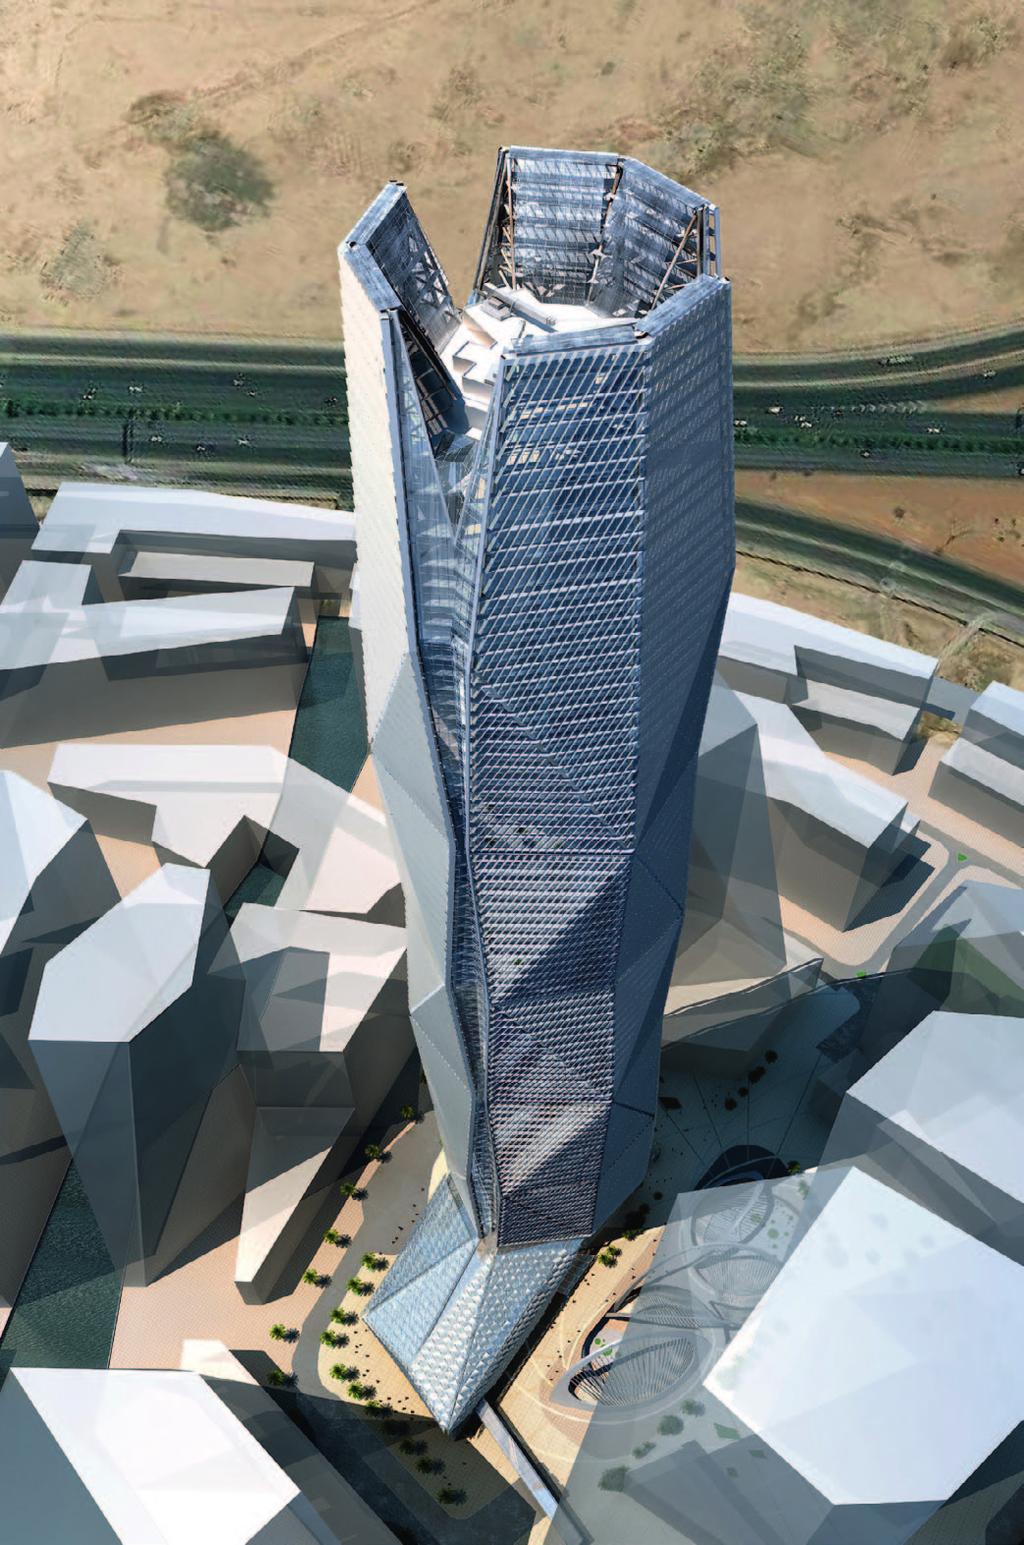 The new administrative office is not only the tallest skyscraper in the country - the construction project which received large international investments is also the tallest building in the world